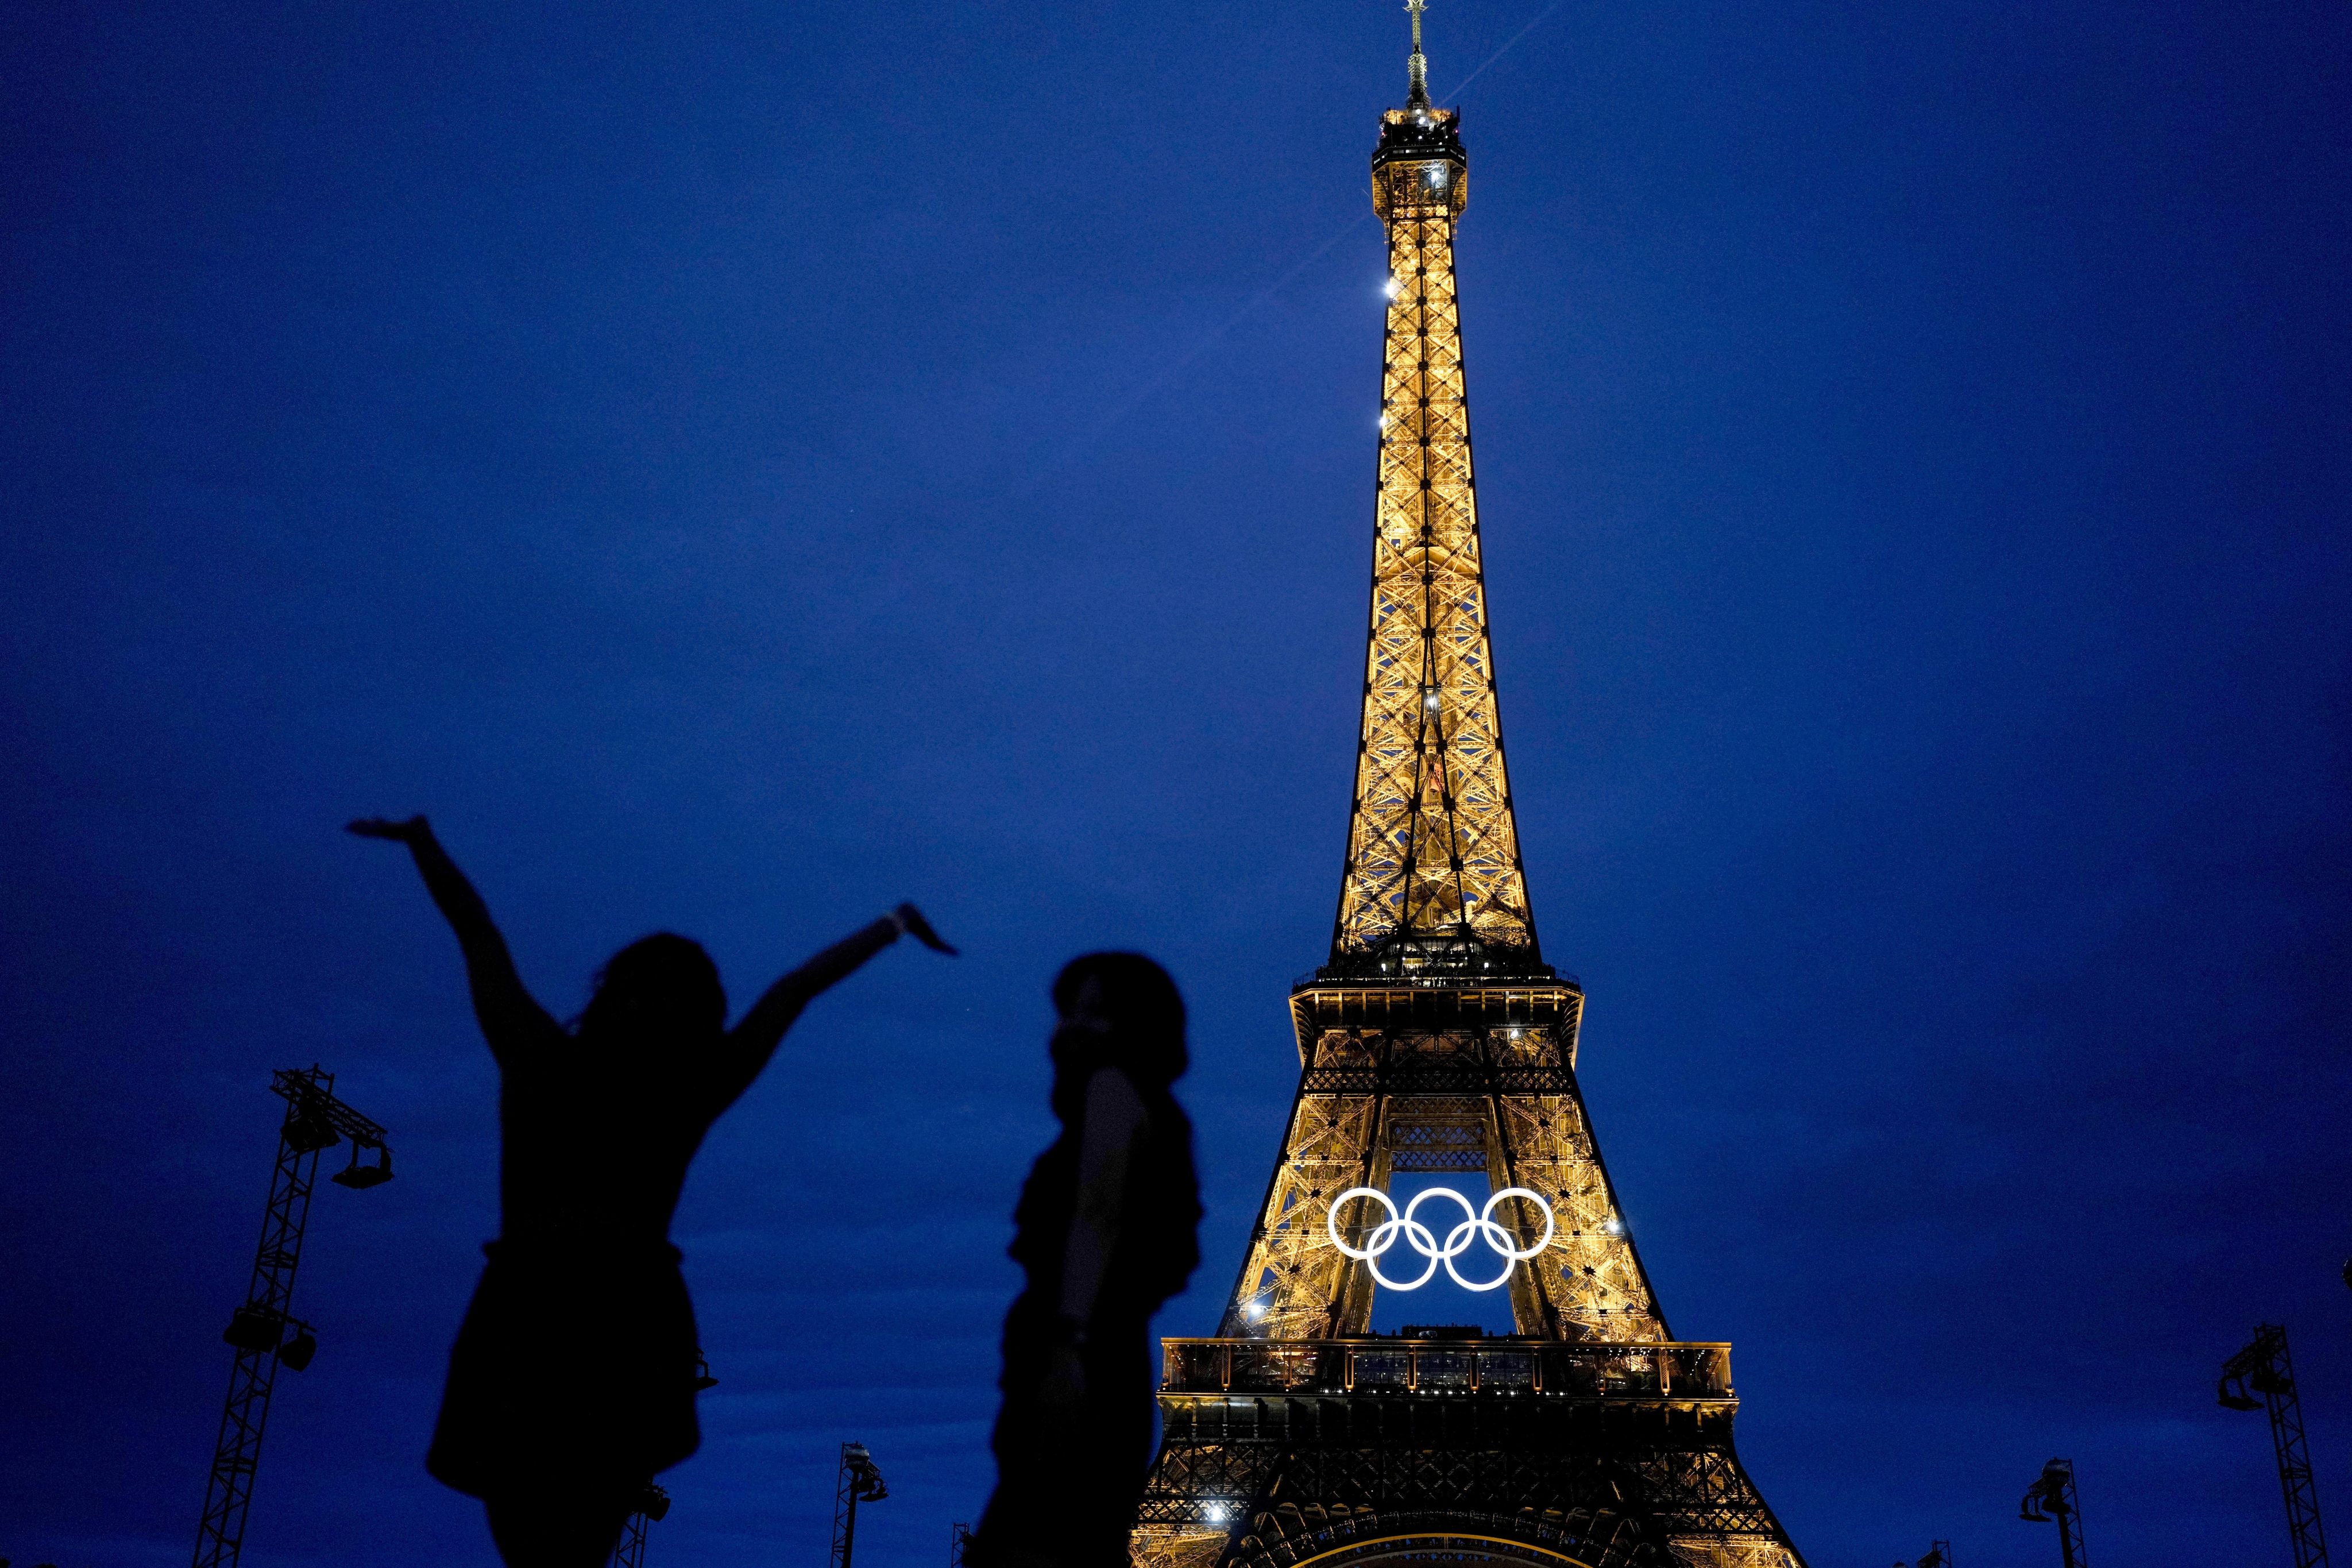 Chinese brands are using the Paris Olympics as a marketing opportunity, opening pop-up stores and sponsoring the Games to build their international brands. Photo: AP